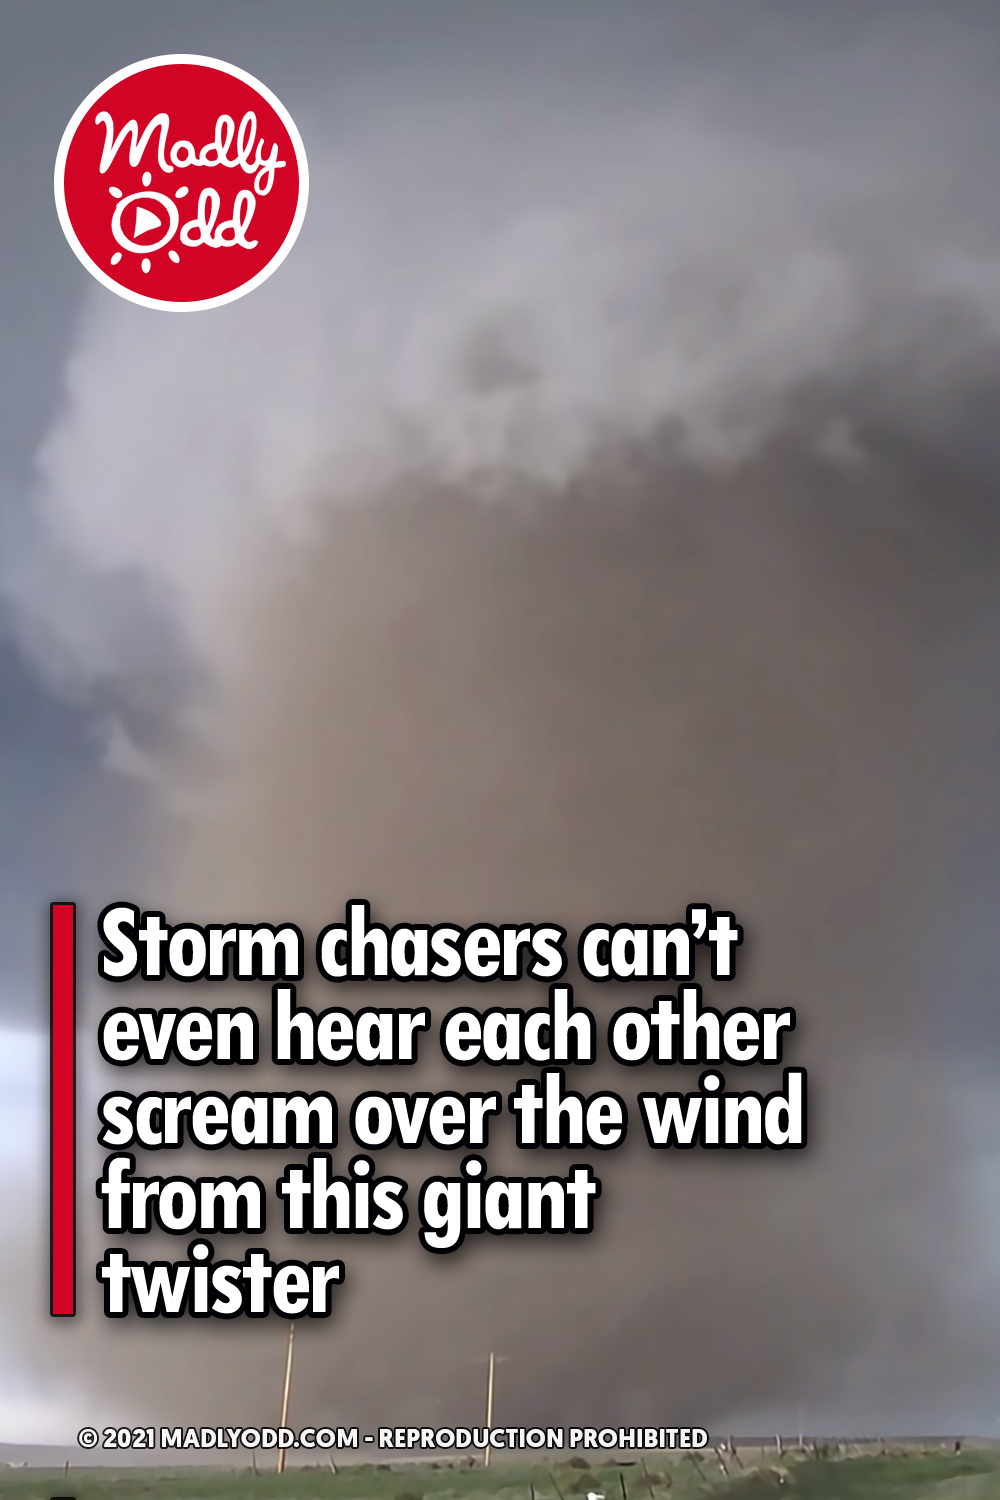 Storm chasers can’t even hear each other scream over the wind from this giant twister